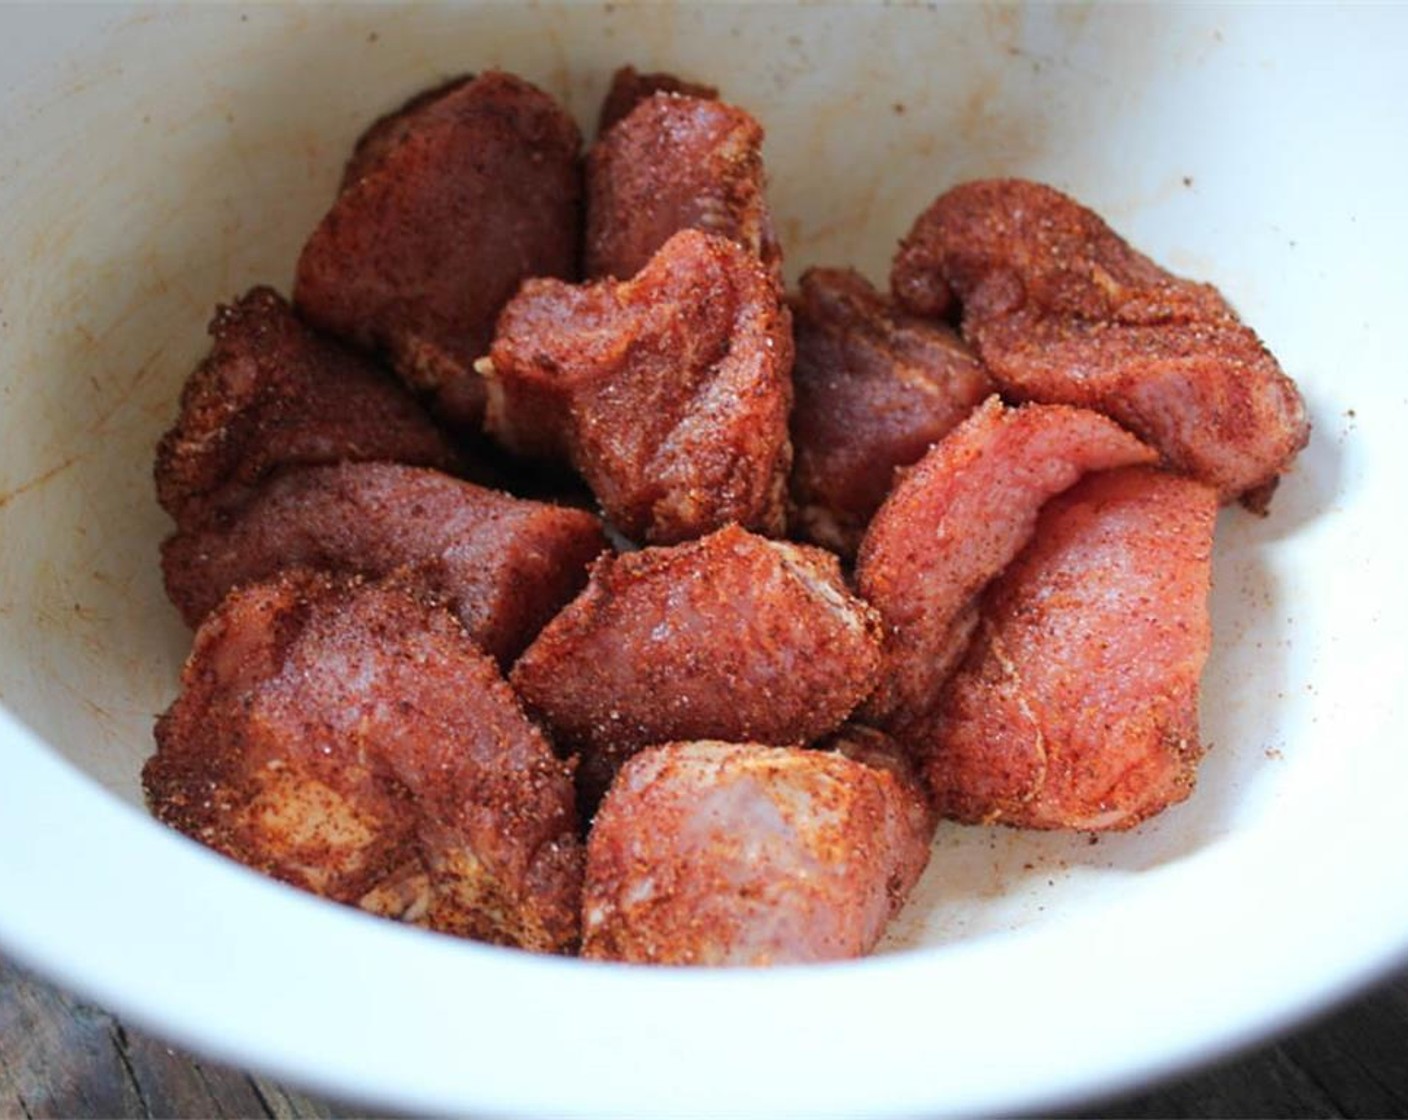 step 2 In a medium bowl, combine the Salt (1/2 Tbsp), Ground Cumin (1/2 Tbsp), and Chipotle Chili Powder (1/2 Tbsp). Add the pieces of pork tenderloin and toss, making sure each piece is well coated in the spice mixture. Cover and refrigerate.